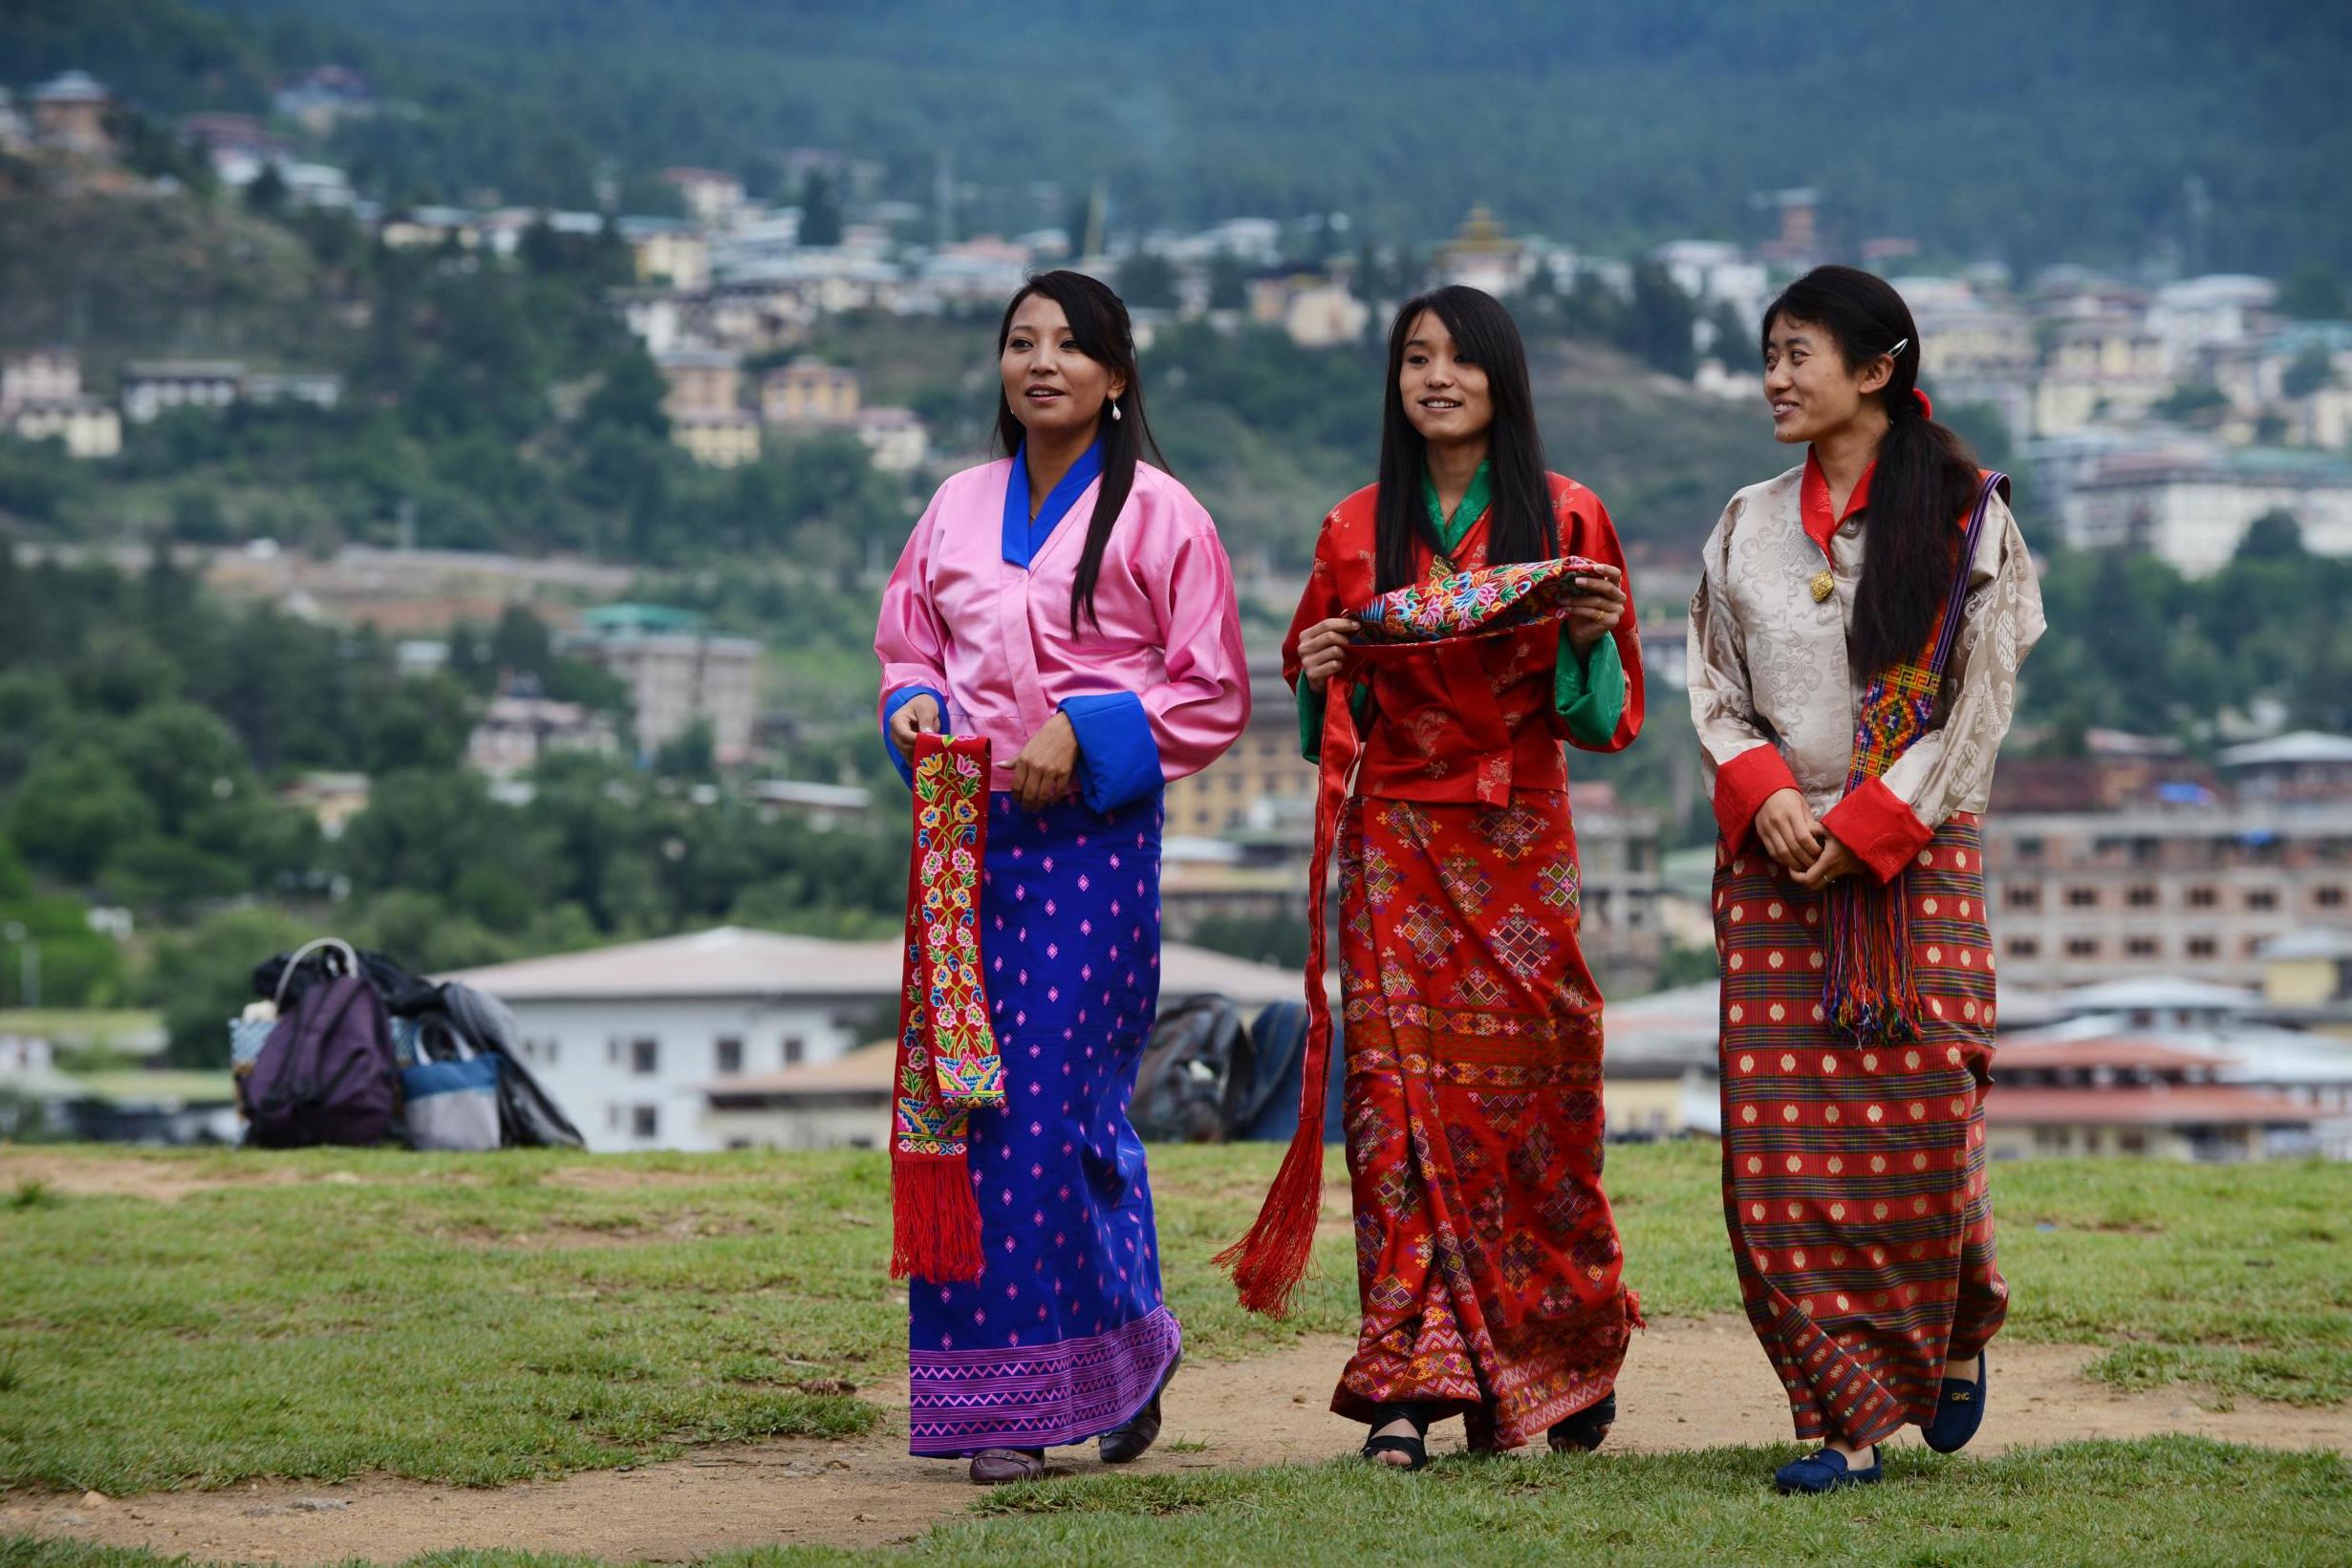 Bhutan, a Buddhist nation, was the first society to determine policy based on the happiness of its citizens (AFP/Getty)